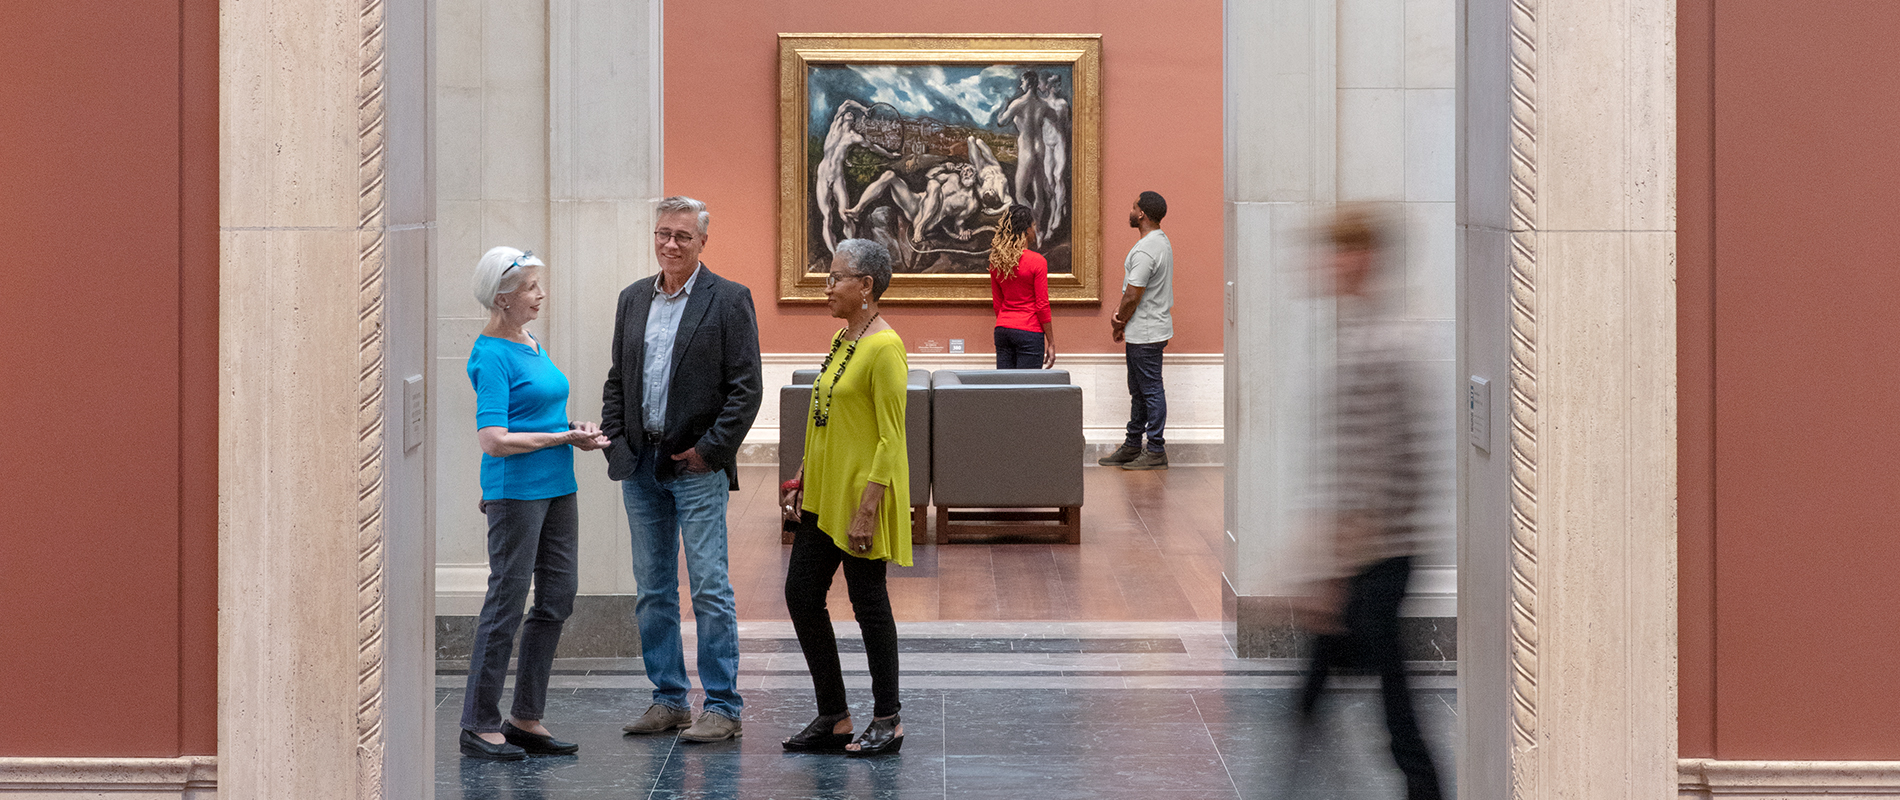 Three people standing and talking inside the National Gallery of Art west building with a painting in the background and other visitors walking by